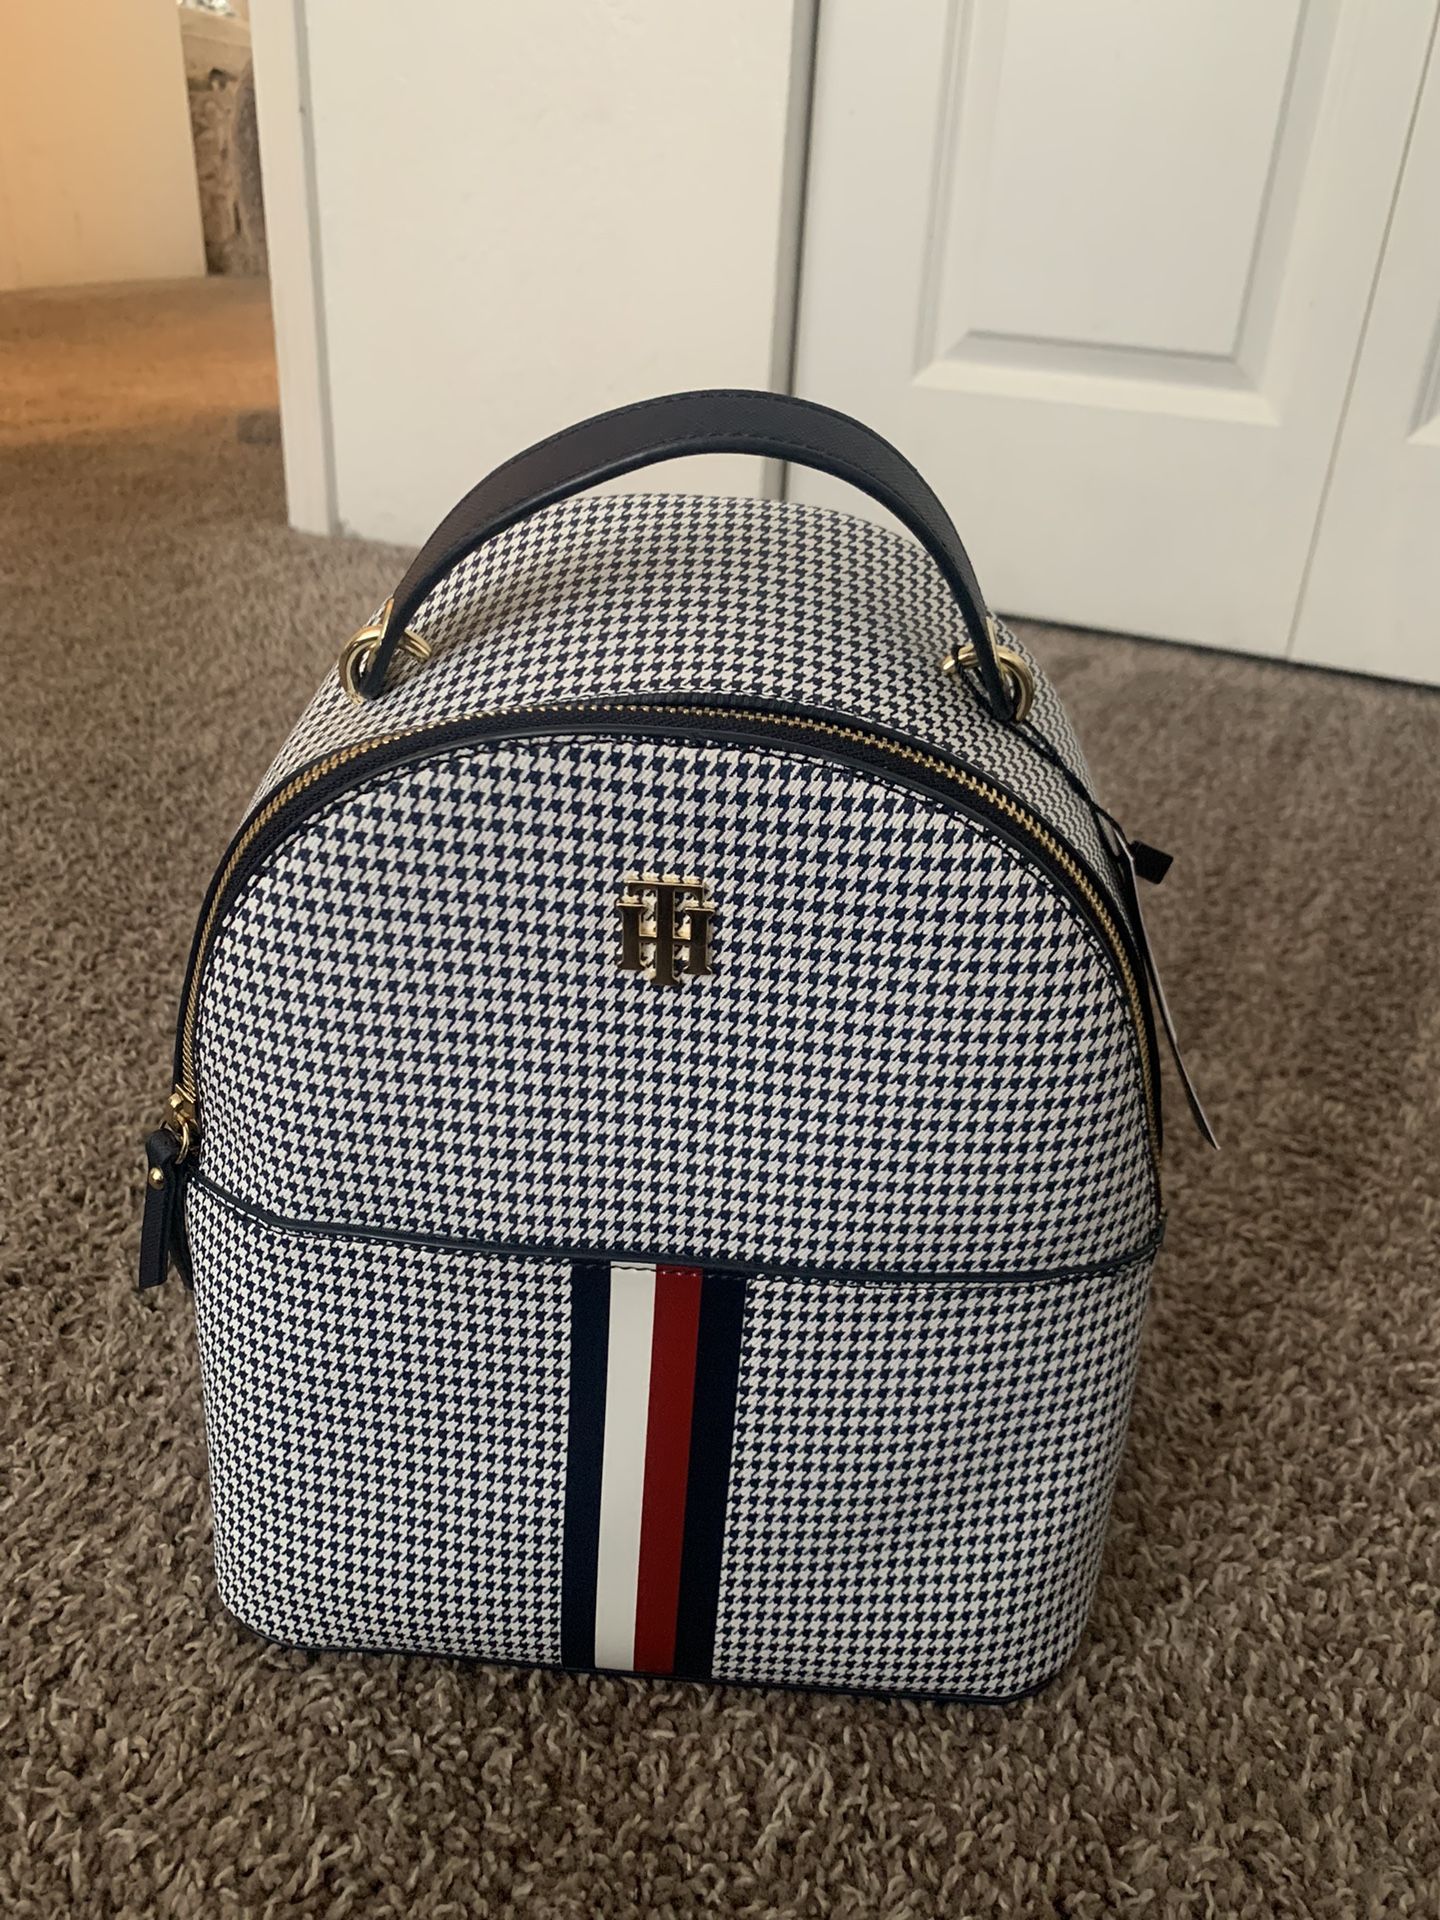 New Woman’s Tommy Hilfiger Backpack